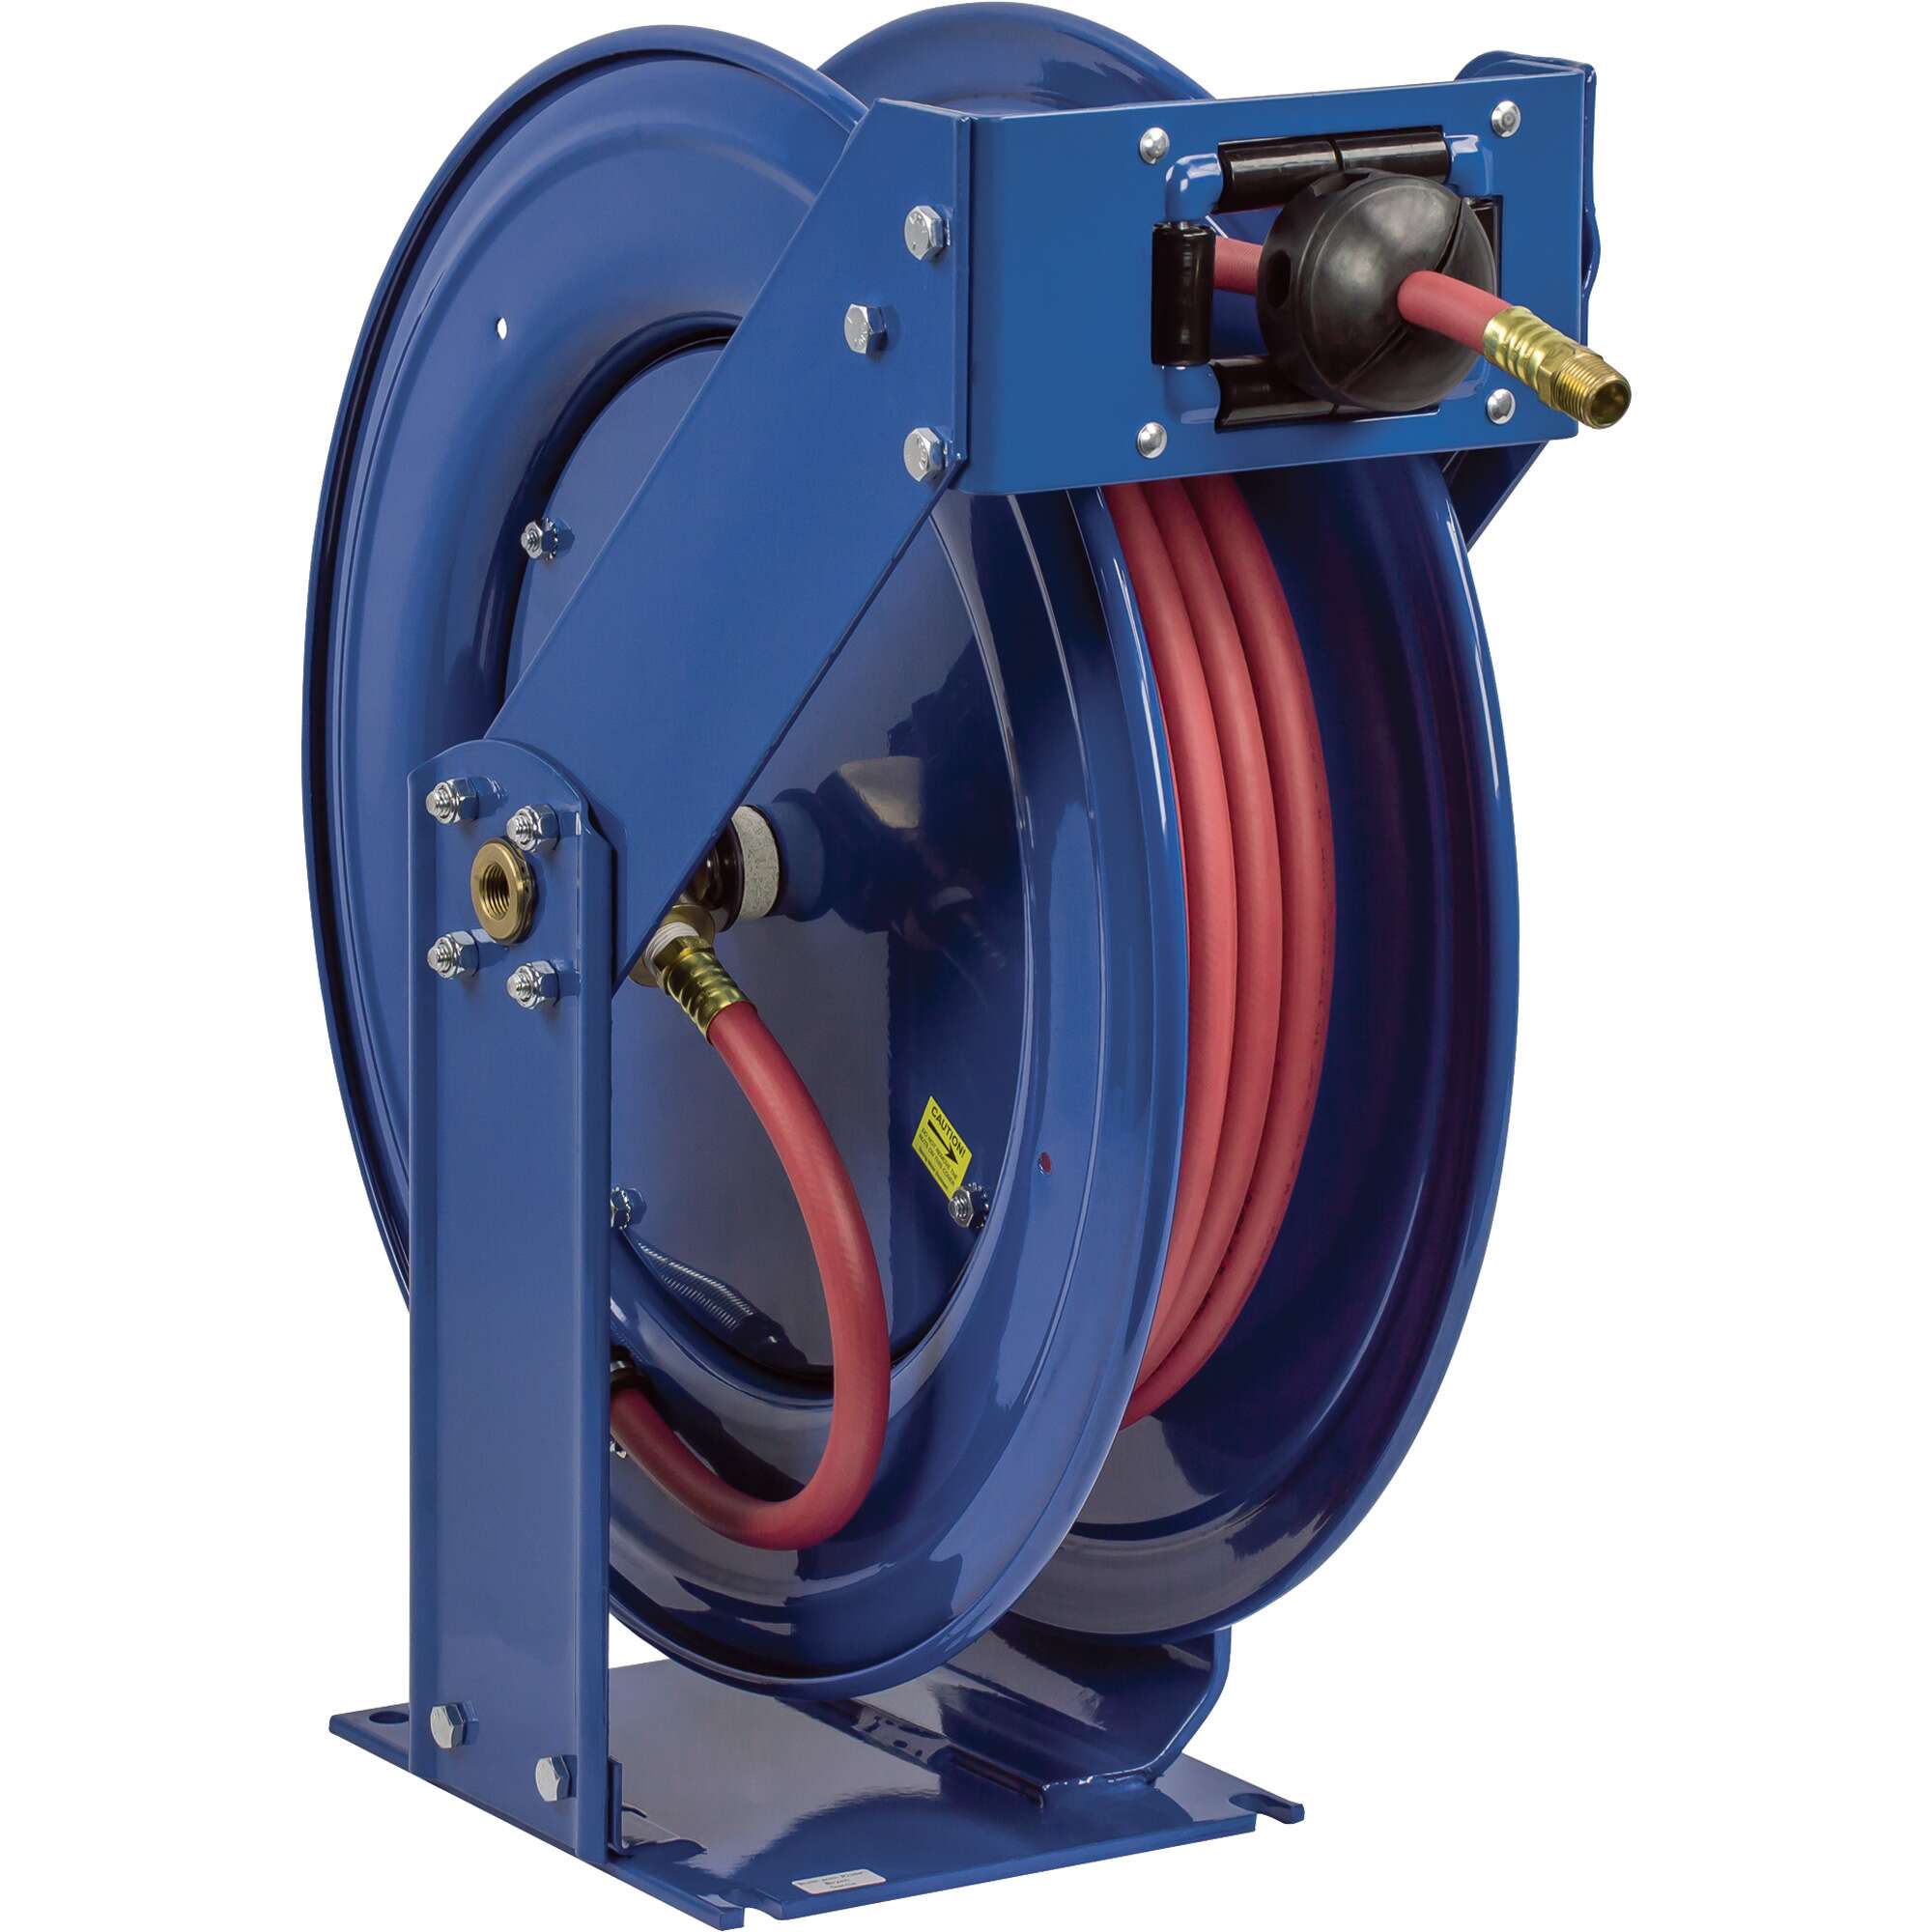 Coxreels Truck Series Maximum Duty Air Hose Reel With 1/2in x 75ft PVC Hose Max 300 PSI